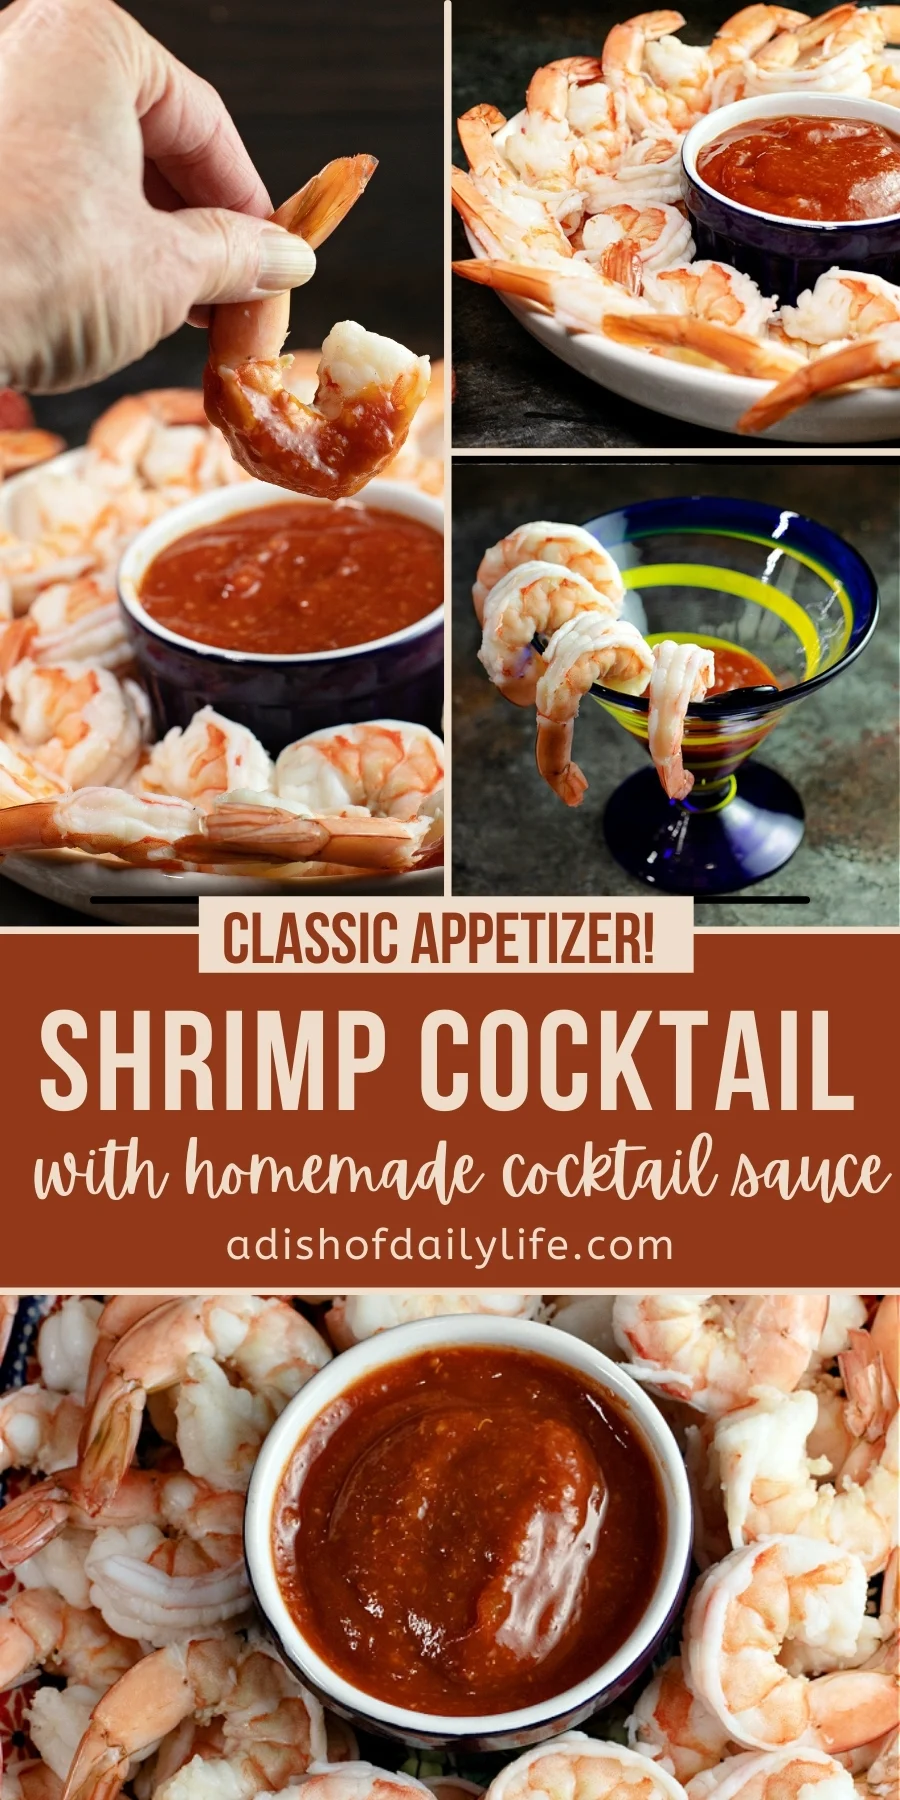 Shrimp cocktail with homemade cocktail sauce